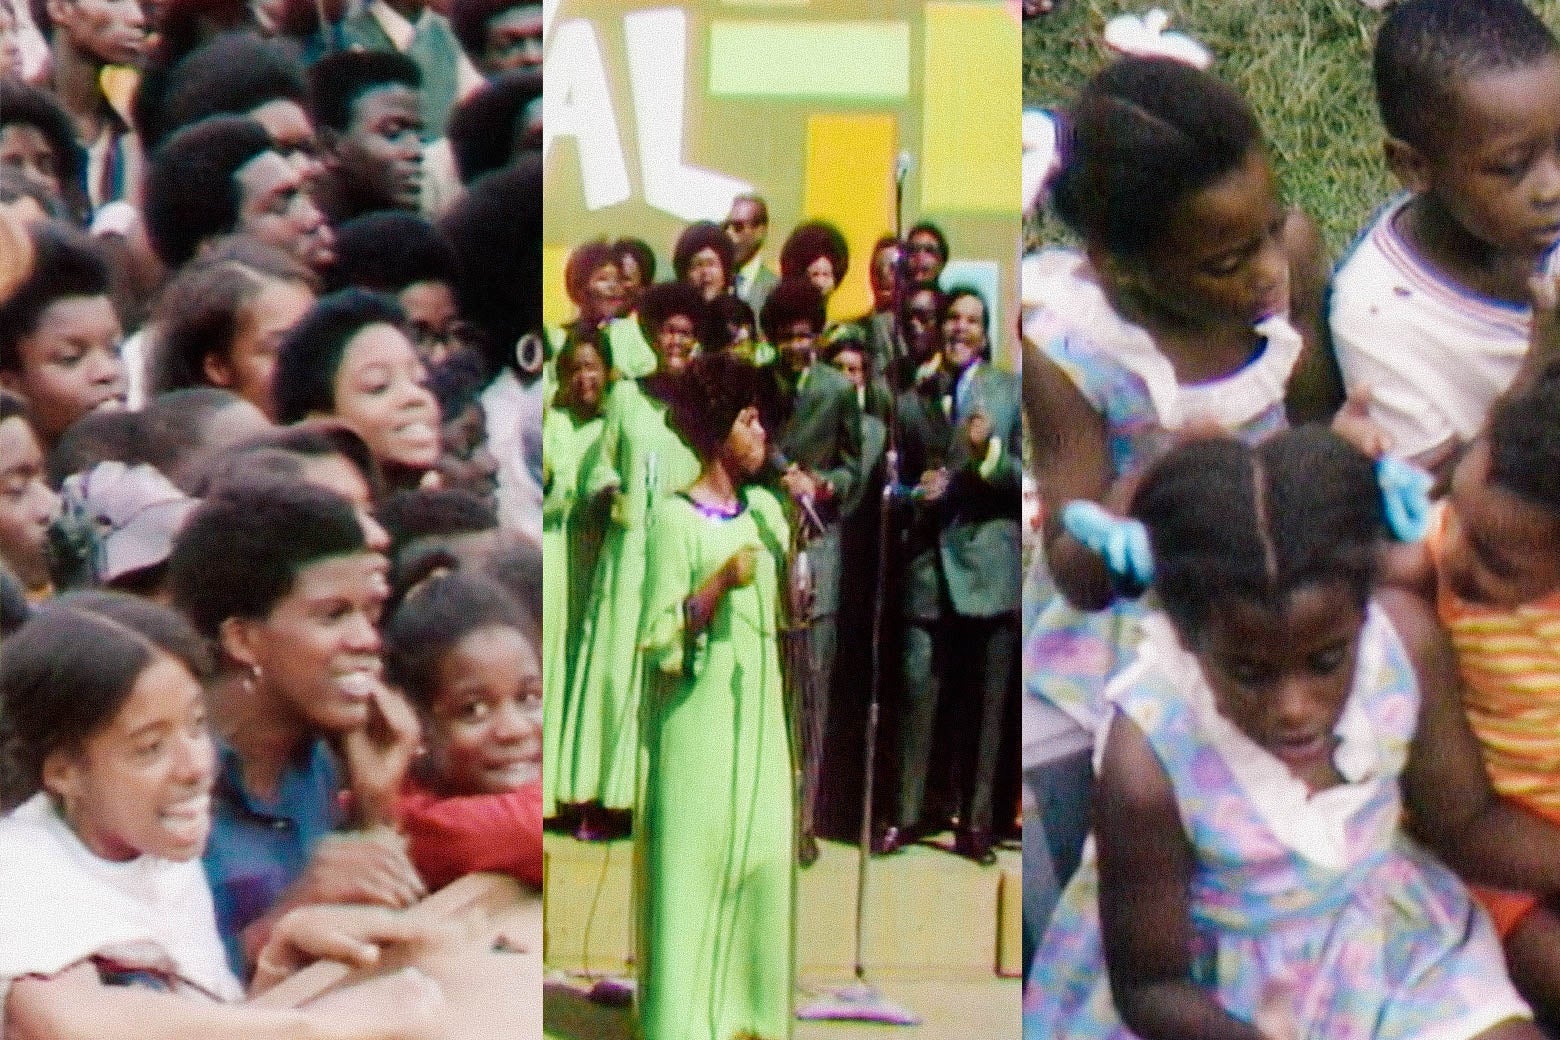 A triptych of images of Karen in the crowd, Terrence on stage with the choir, and Joy sitting with her sister and other children.